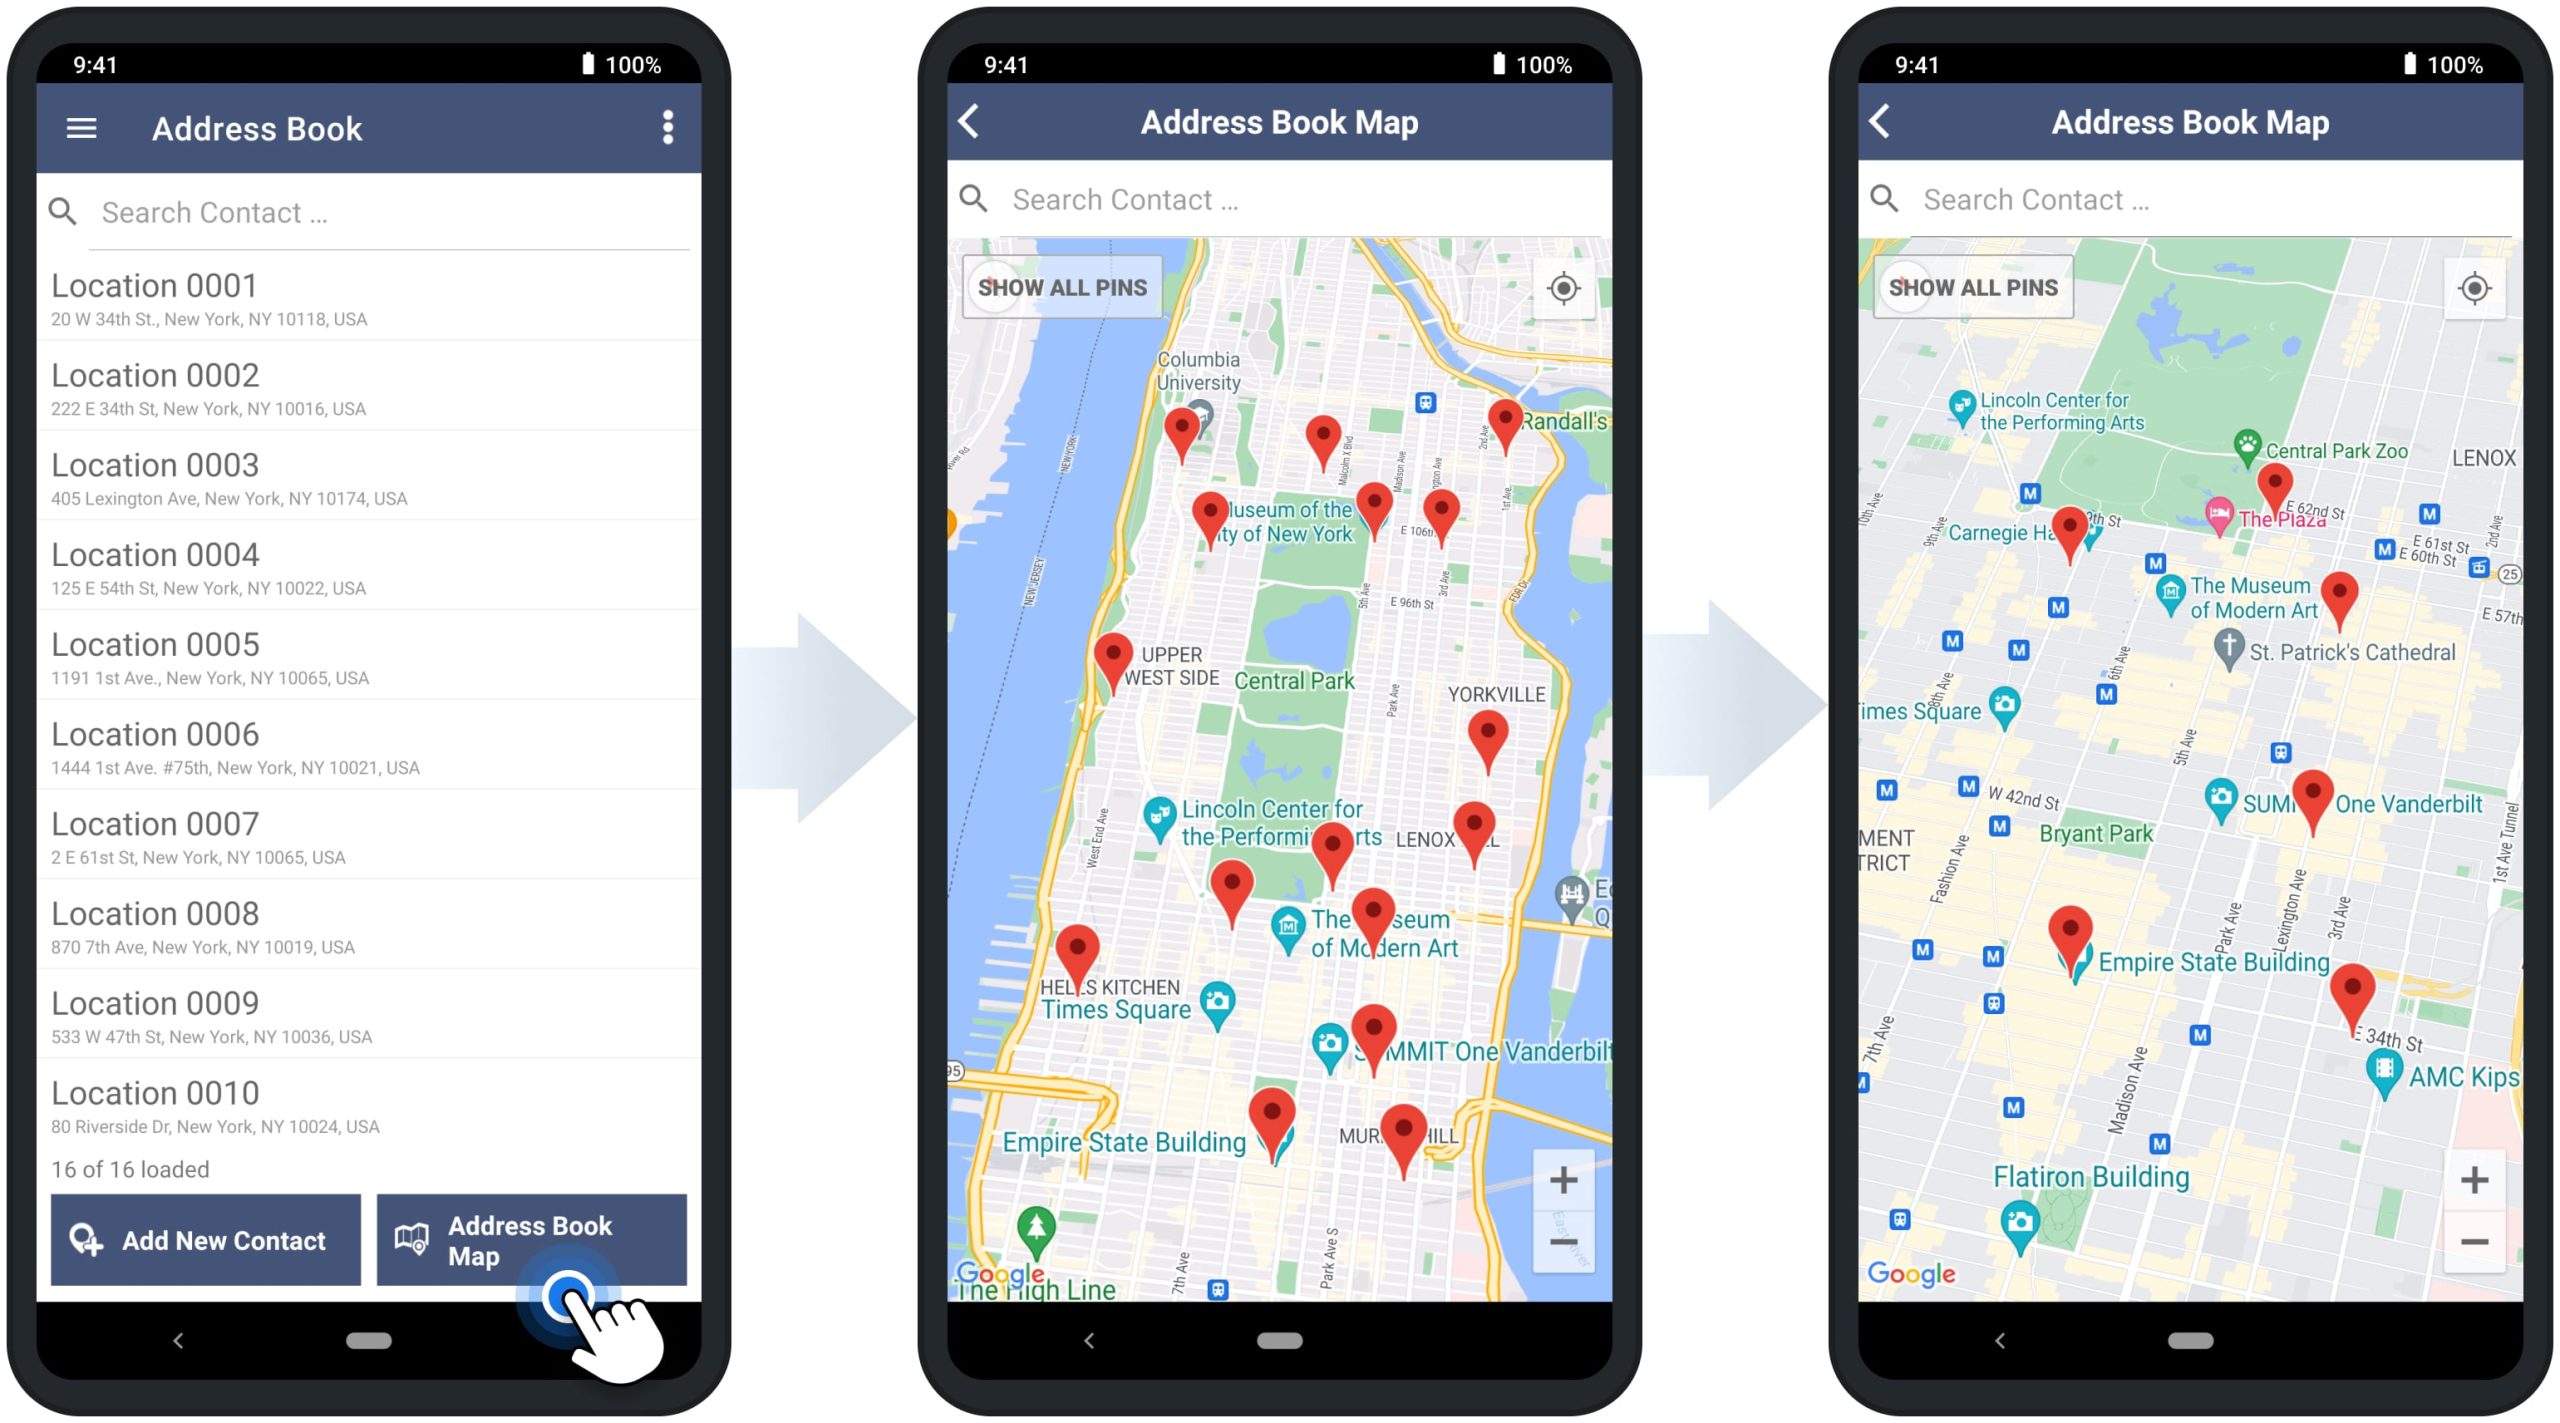 Open addresses and locations on the Address Book Map using Route4Me's Android Route Planning app.